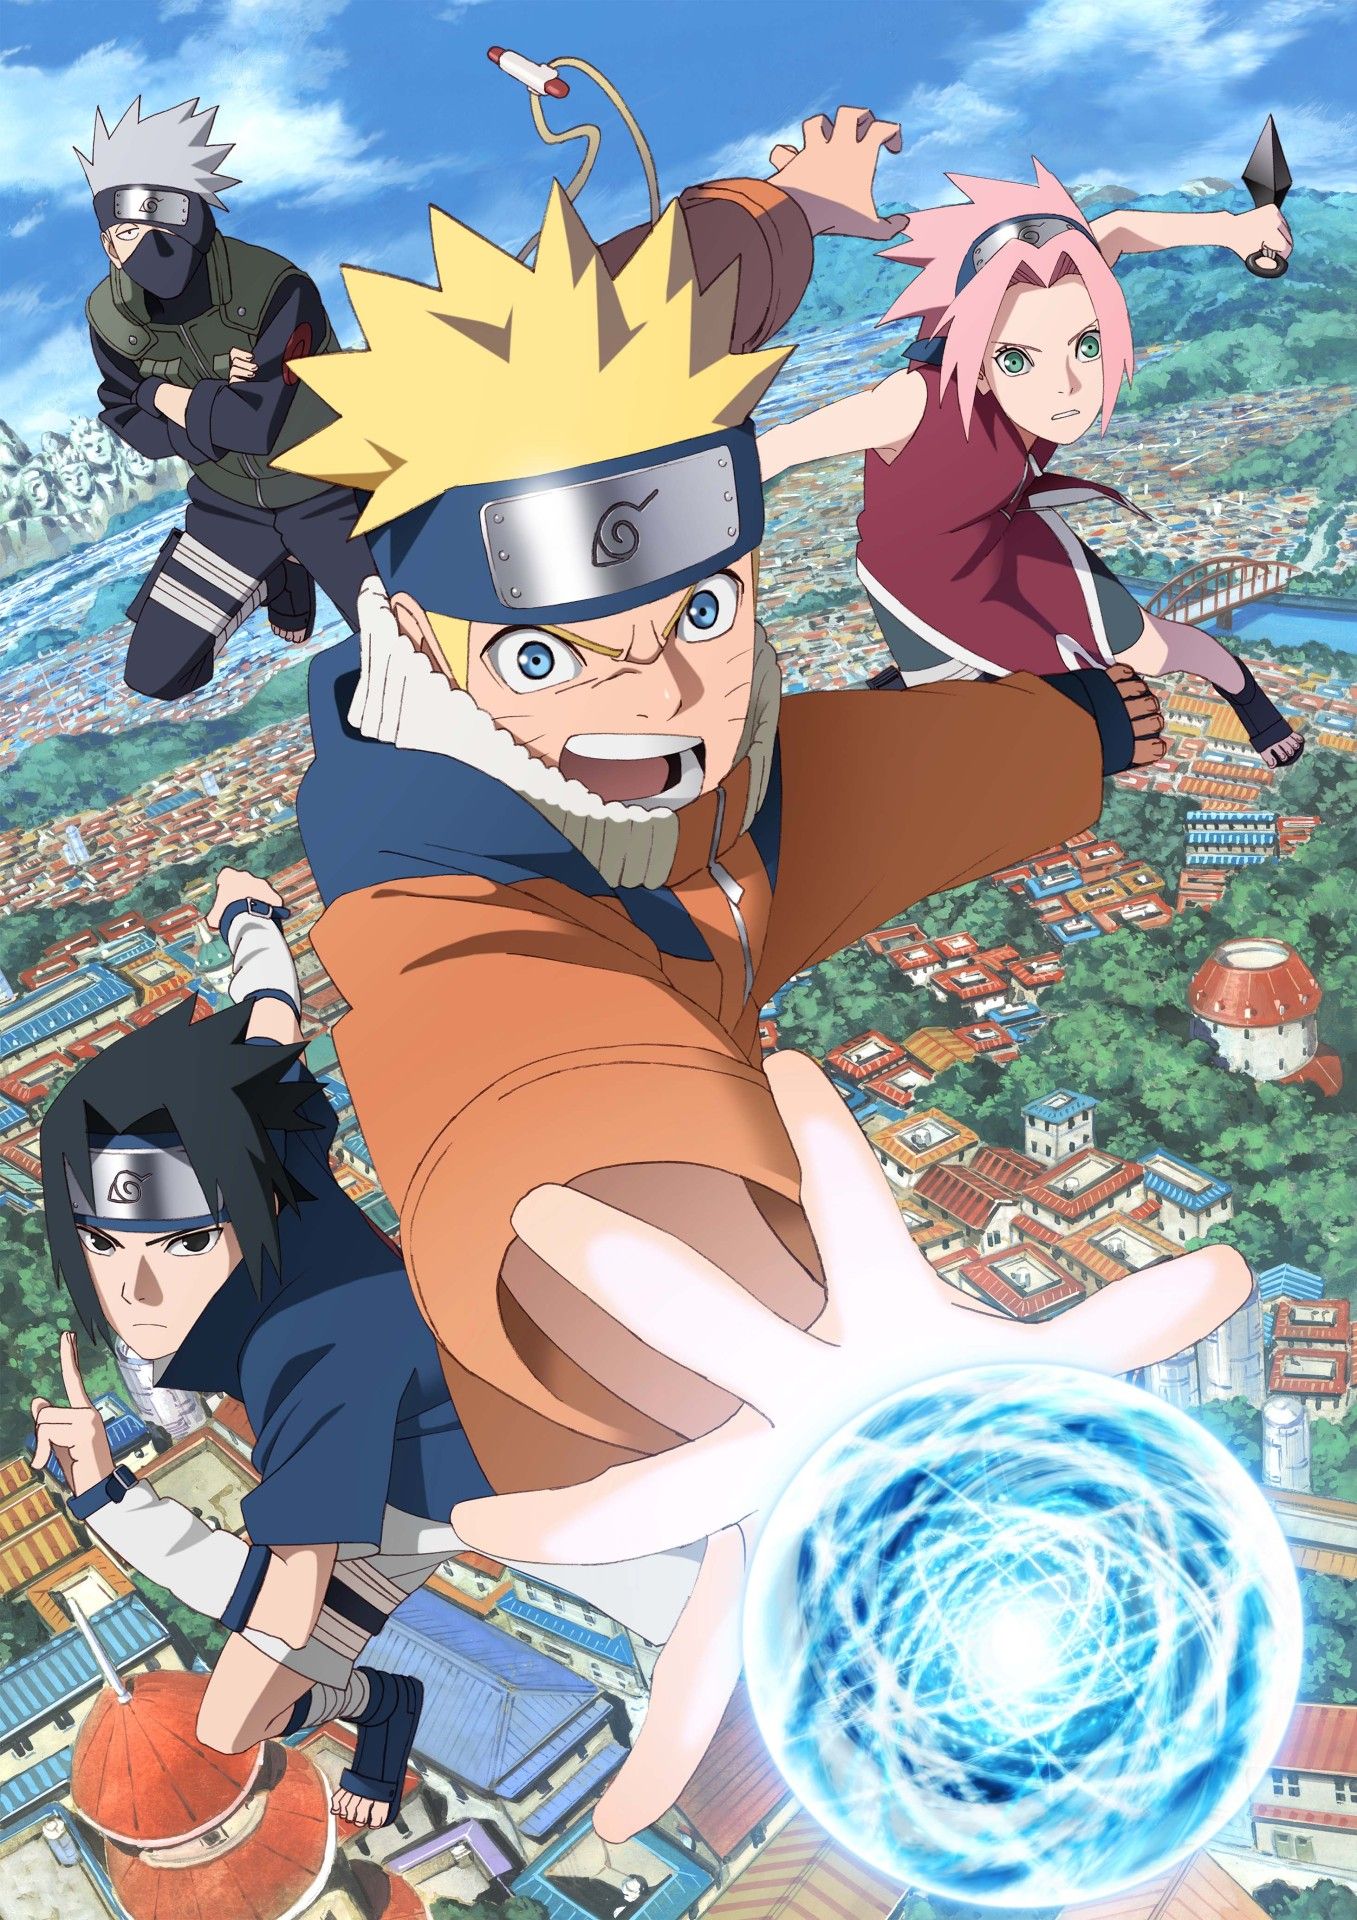 How to Watch Naruto Movies in Chronological Order